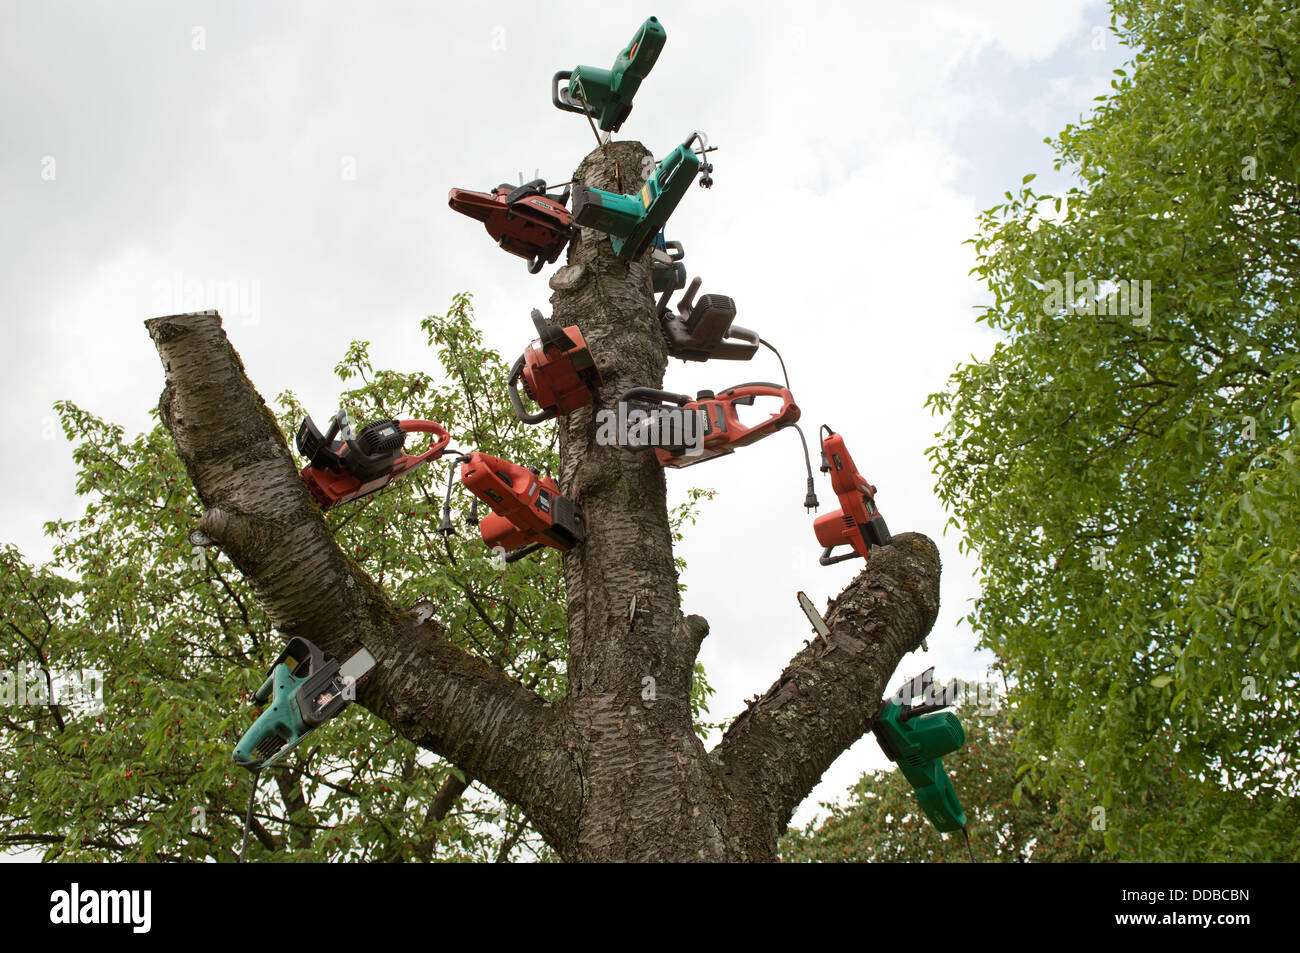 A display of old chainsaws in a tree Stock Photo